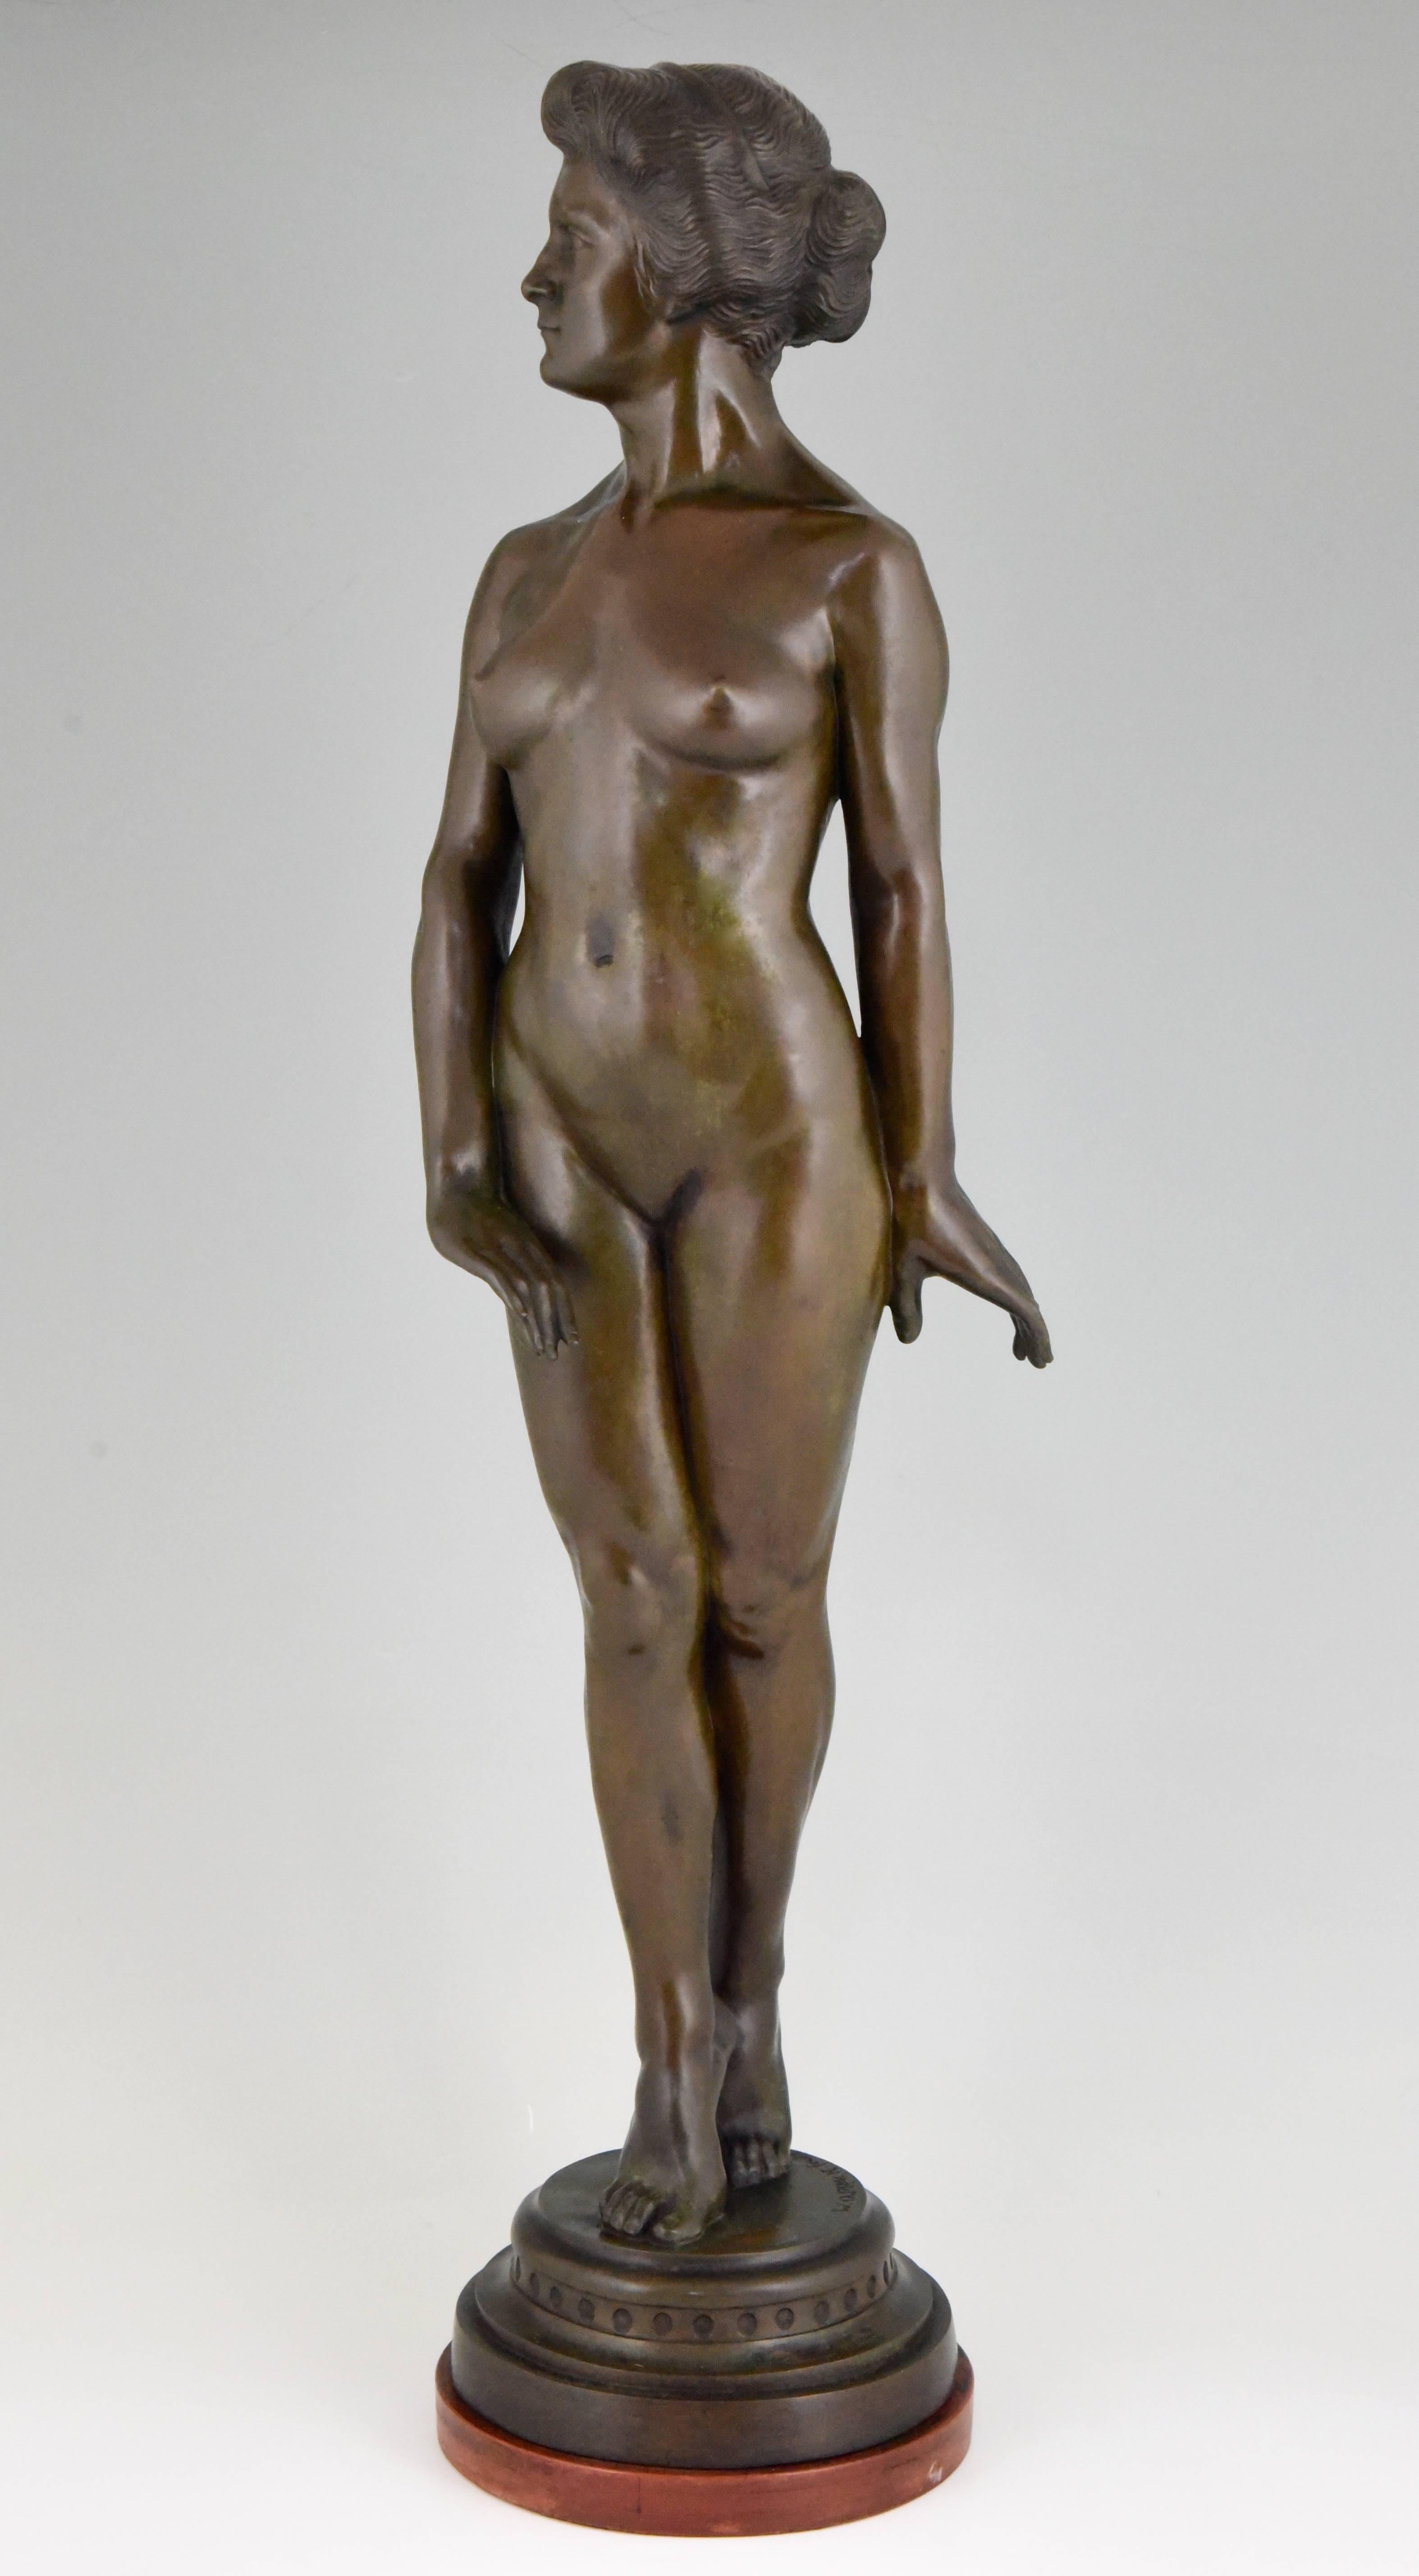 Art Deco bronze sculpture of a standing nude.
Artist/ maker: Wilhelm Oskar Prack (born in Germany 1869)
Signature/ marks: W. O. Prack
Style: Art Deco.
Condition: Very good.
Date: 1930.
Material: Patinated bronze. Wooden base.
Origin: